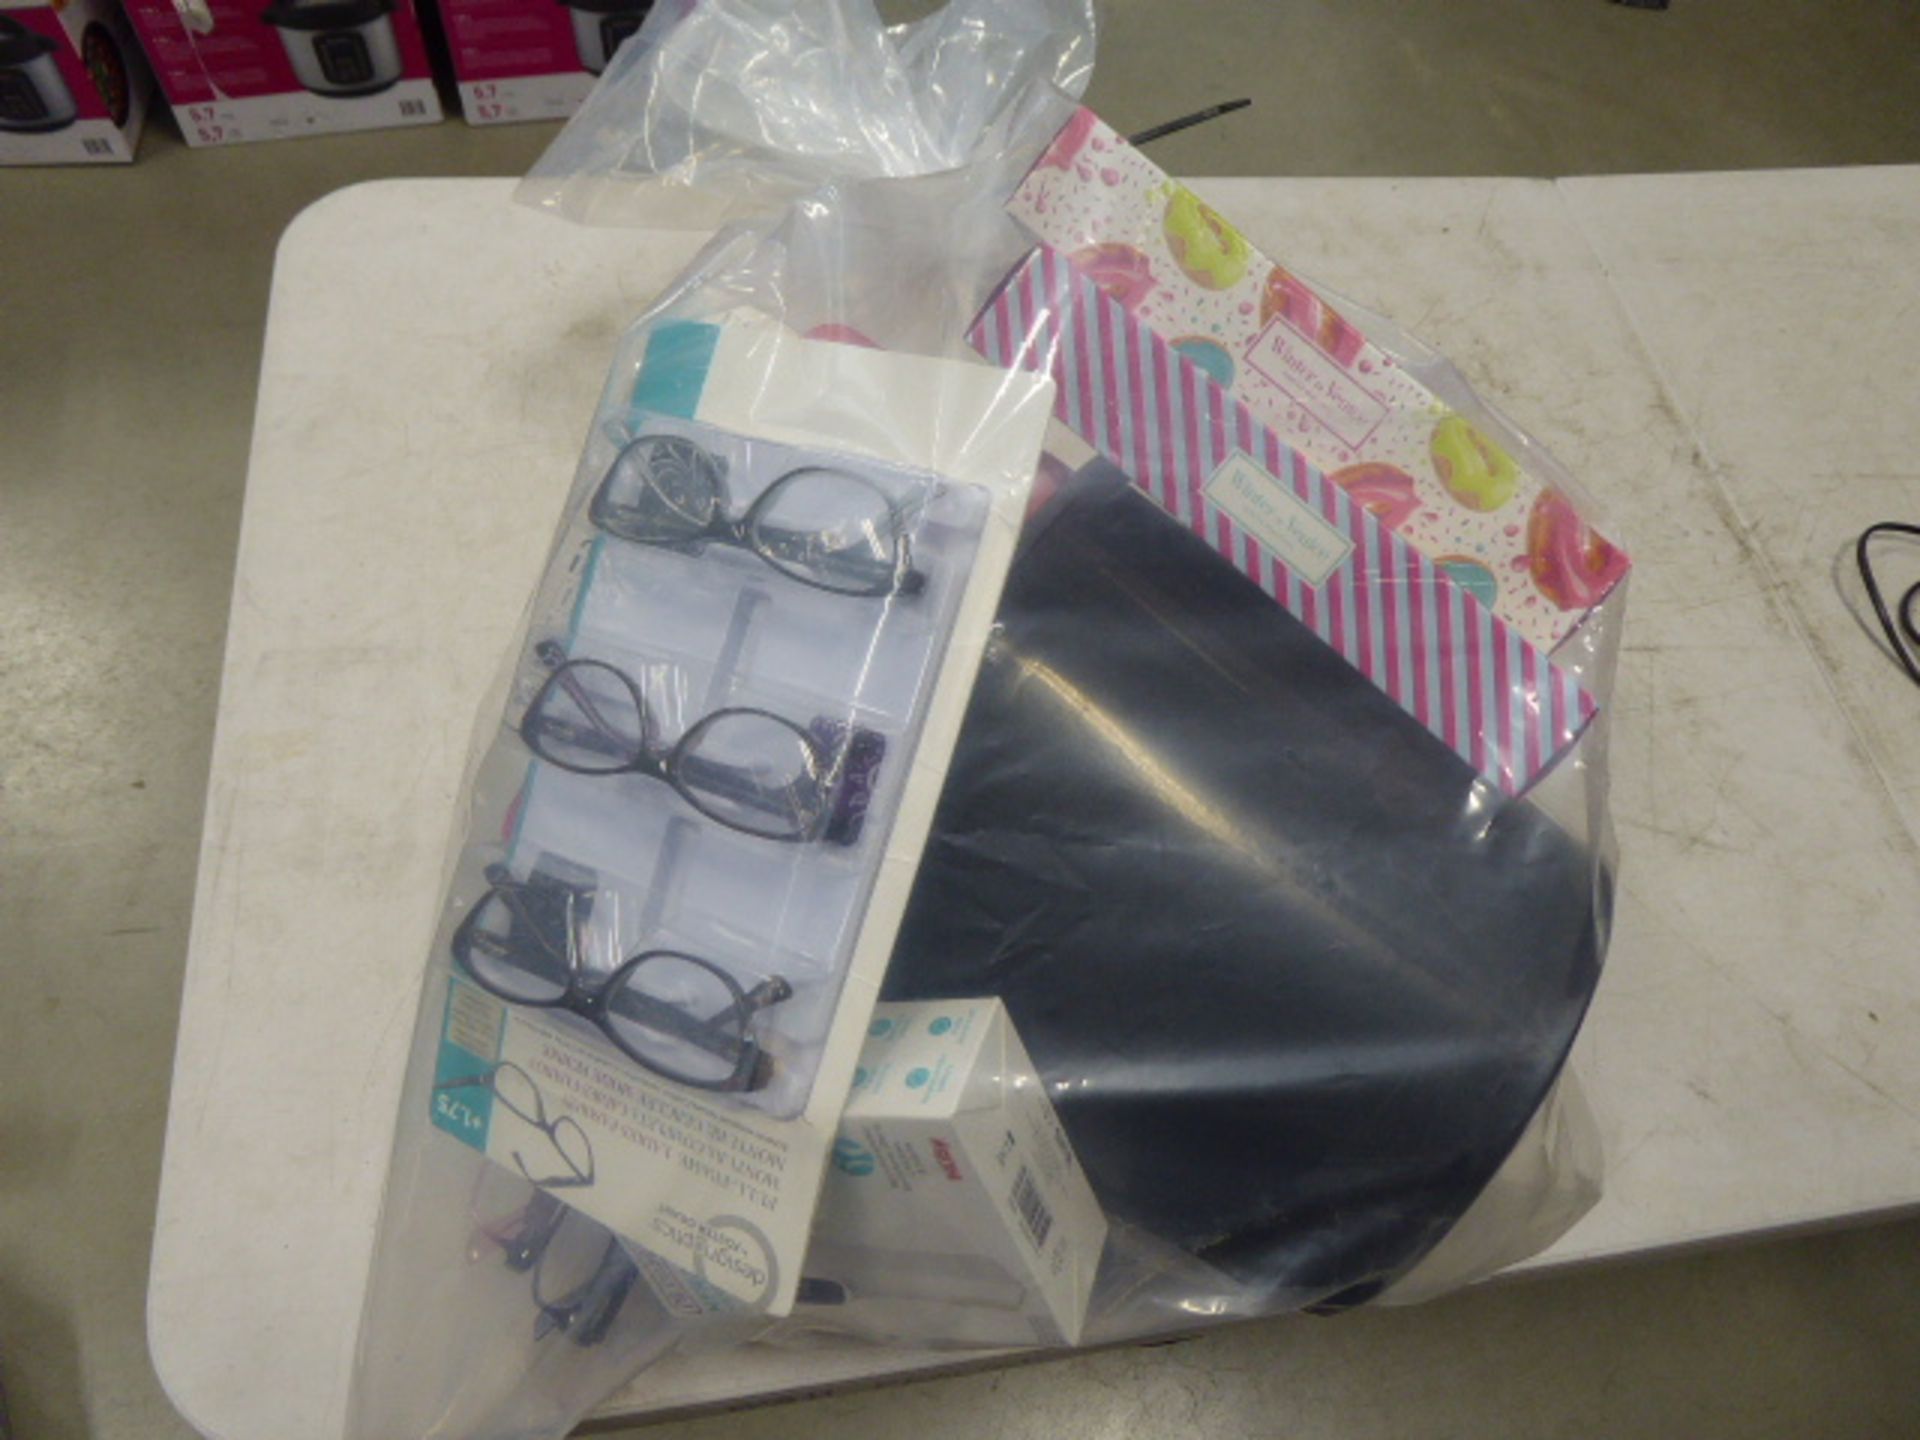 Bag containing bucket, bath bombs, reading glasses, thermometers, etc.